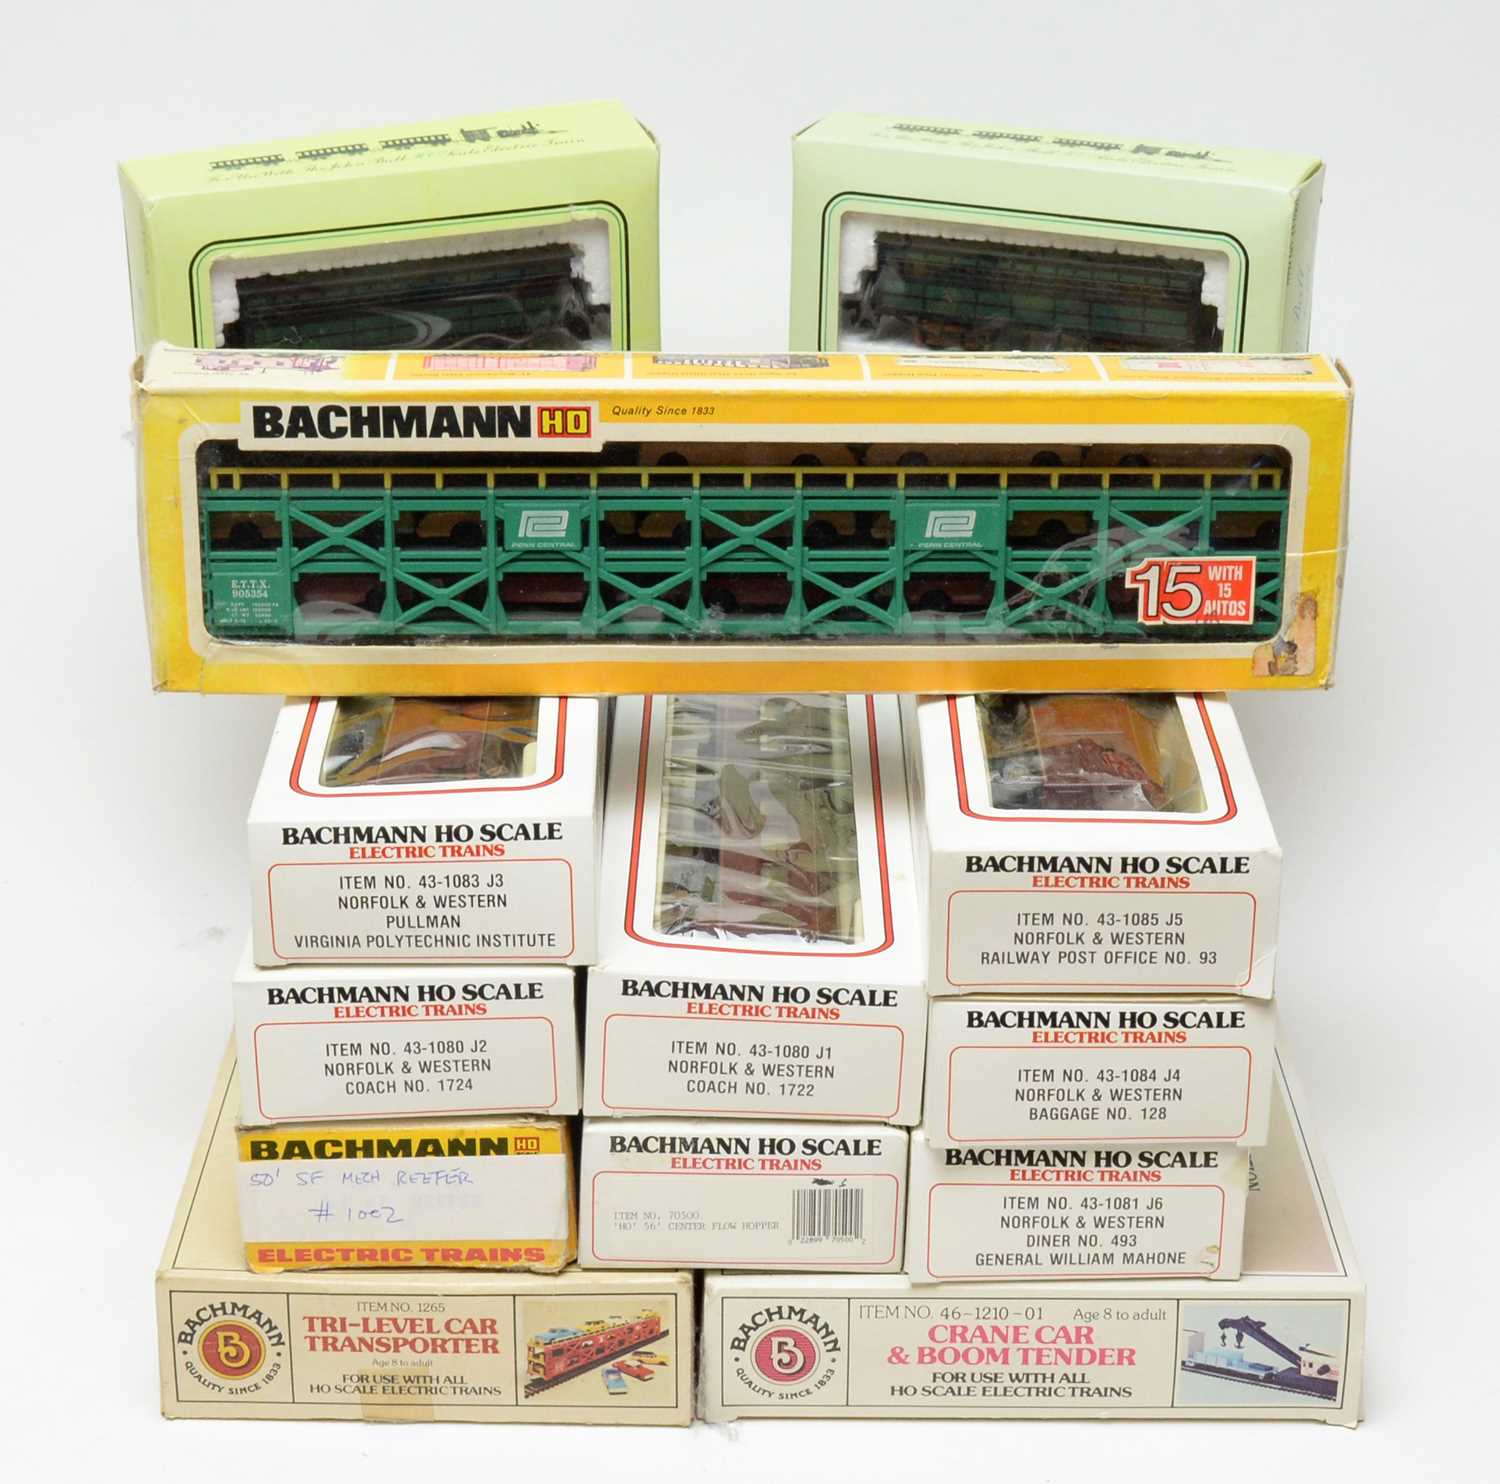 Bachmann HO-gauge Electric Trains Series boxed carriages and rolling stock.